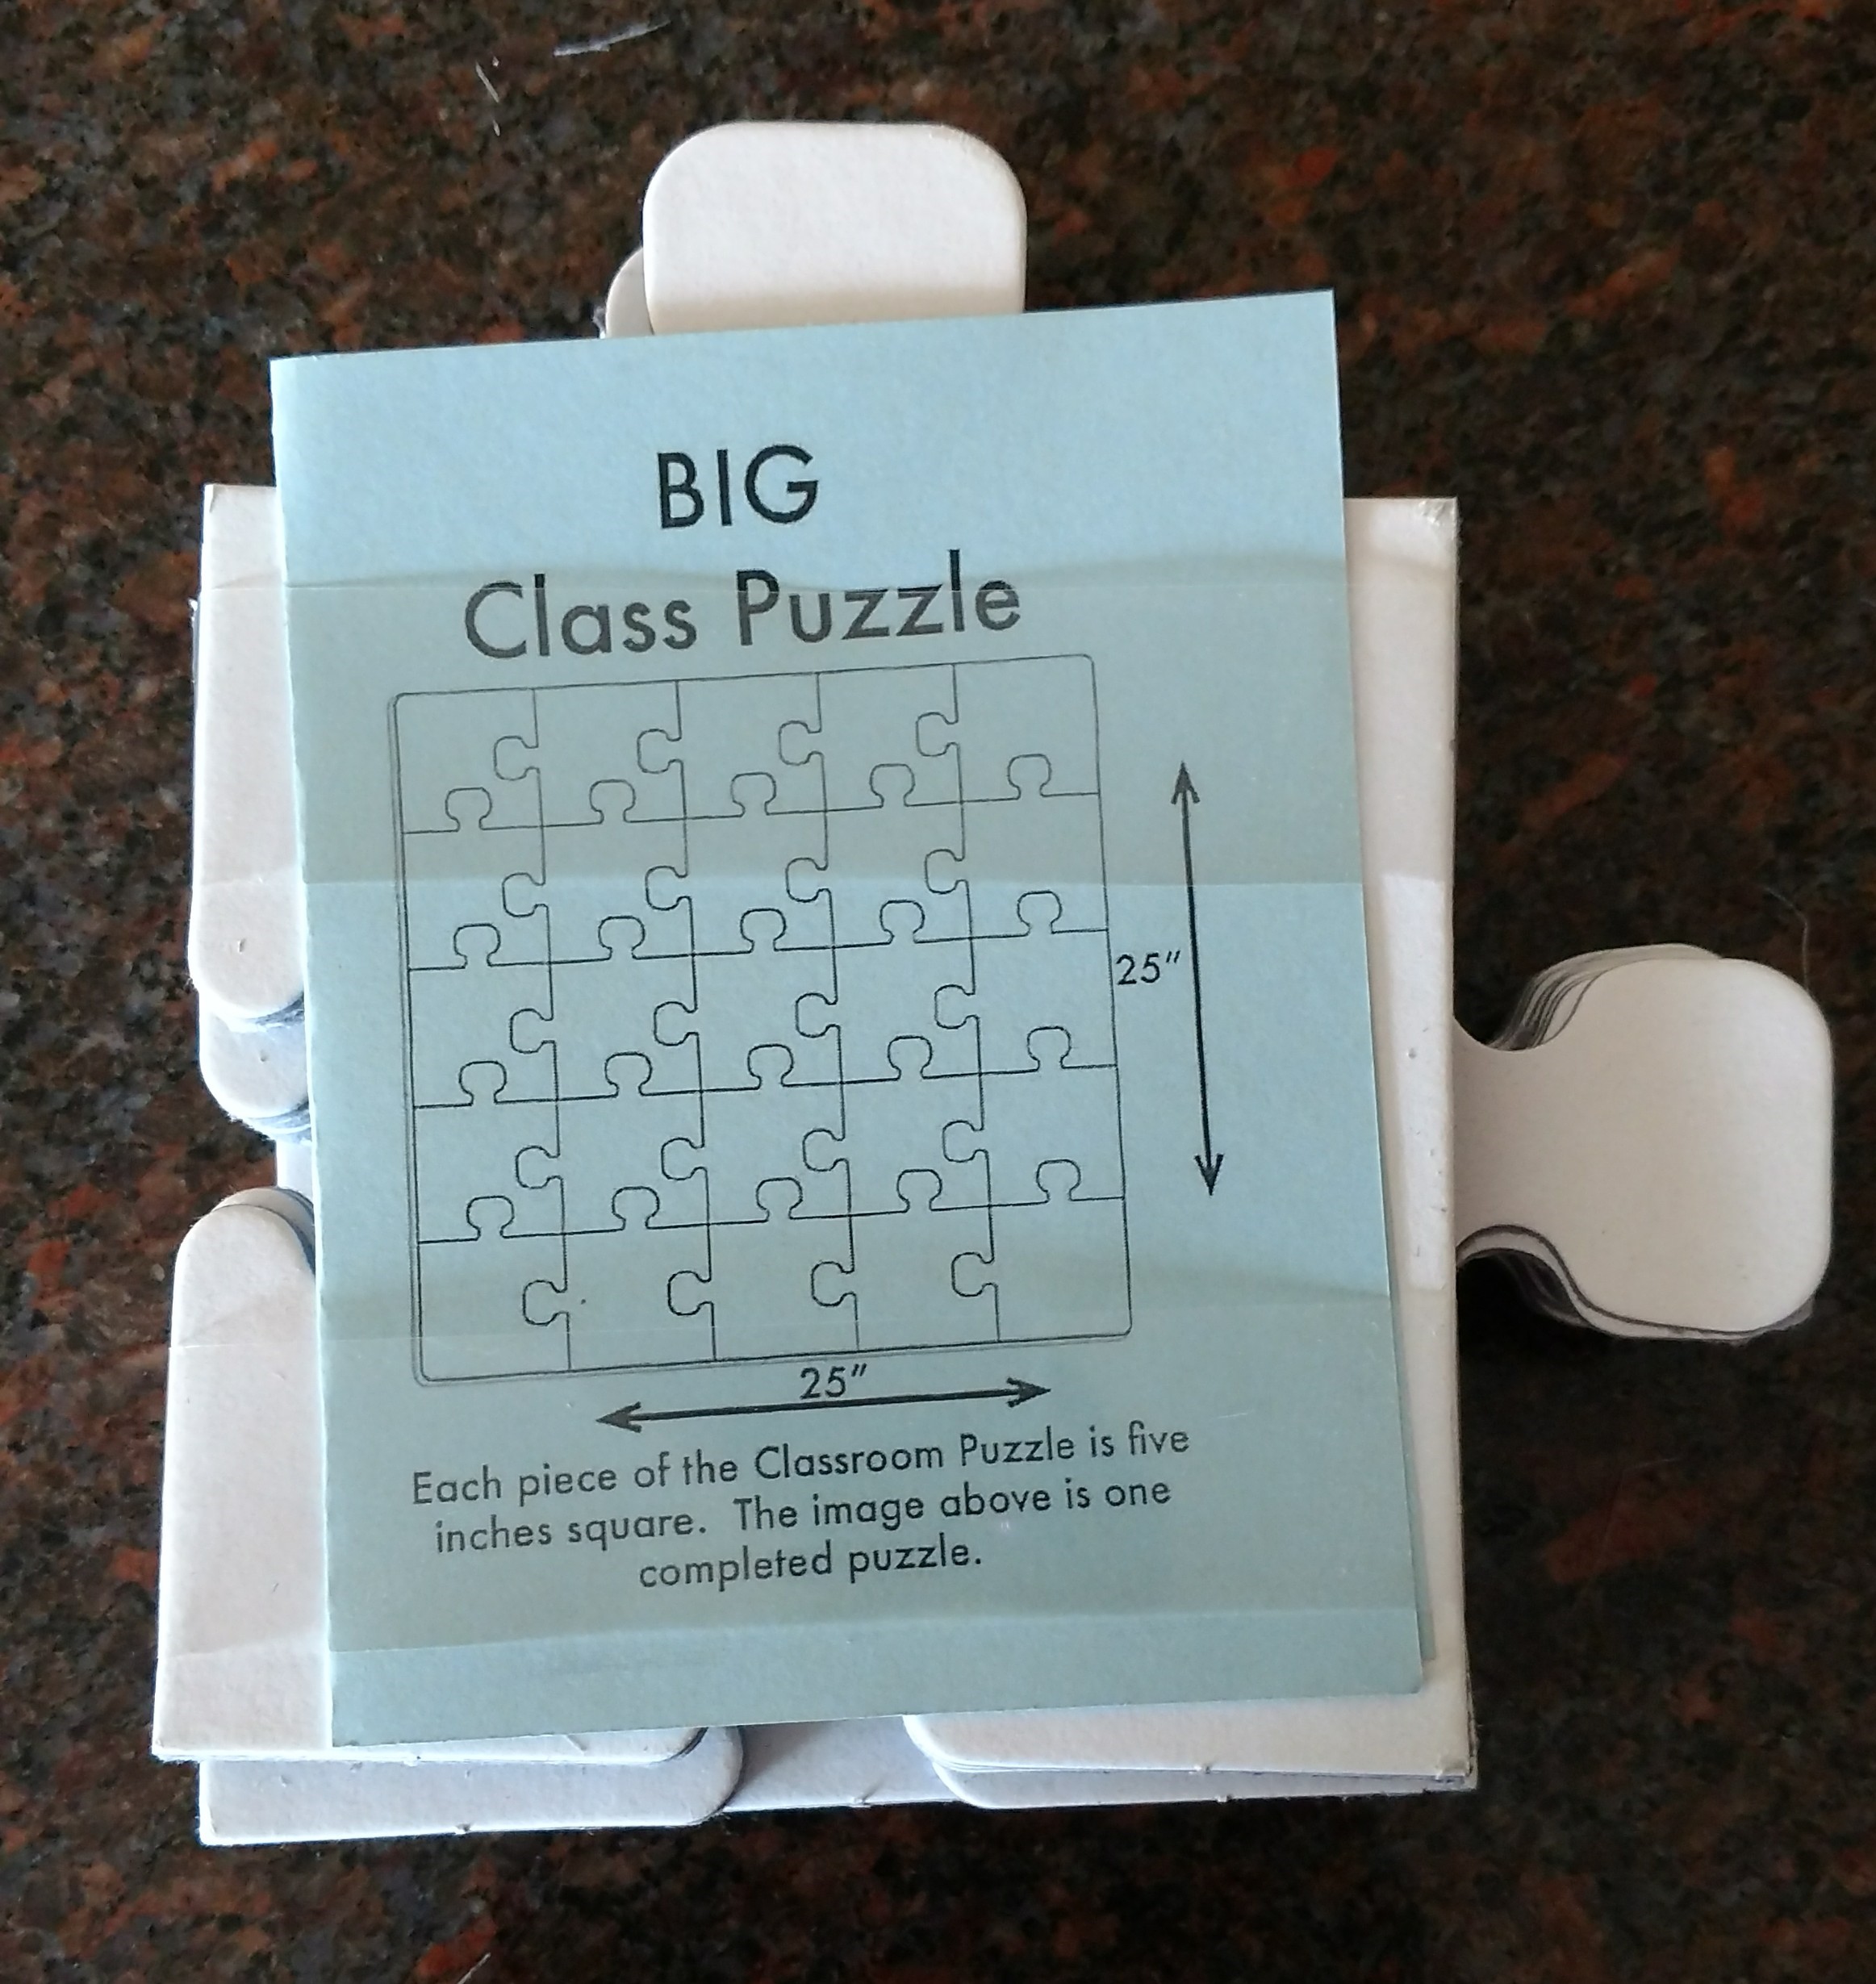 Blank Books|Blank Glass Paperweights|Bookmark  Tassels|Games|Big Puzzles for your artwork! Imagine, Create & Illustrate